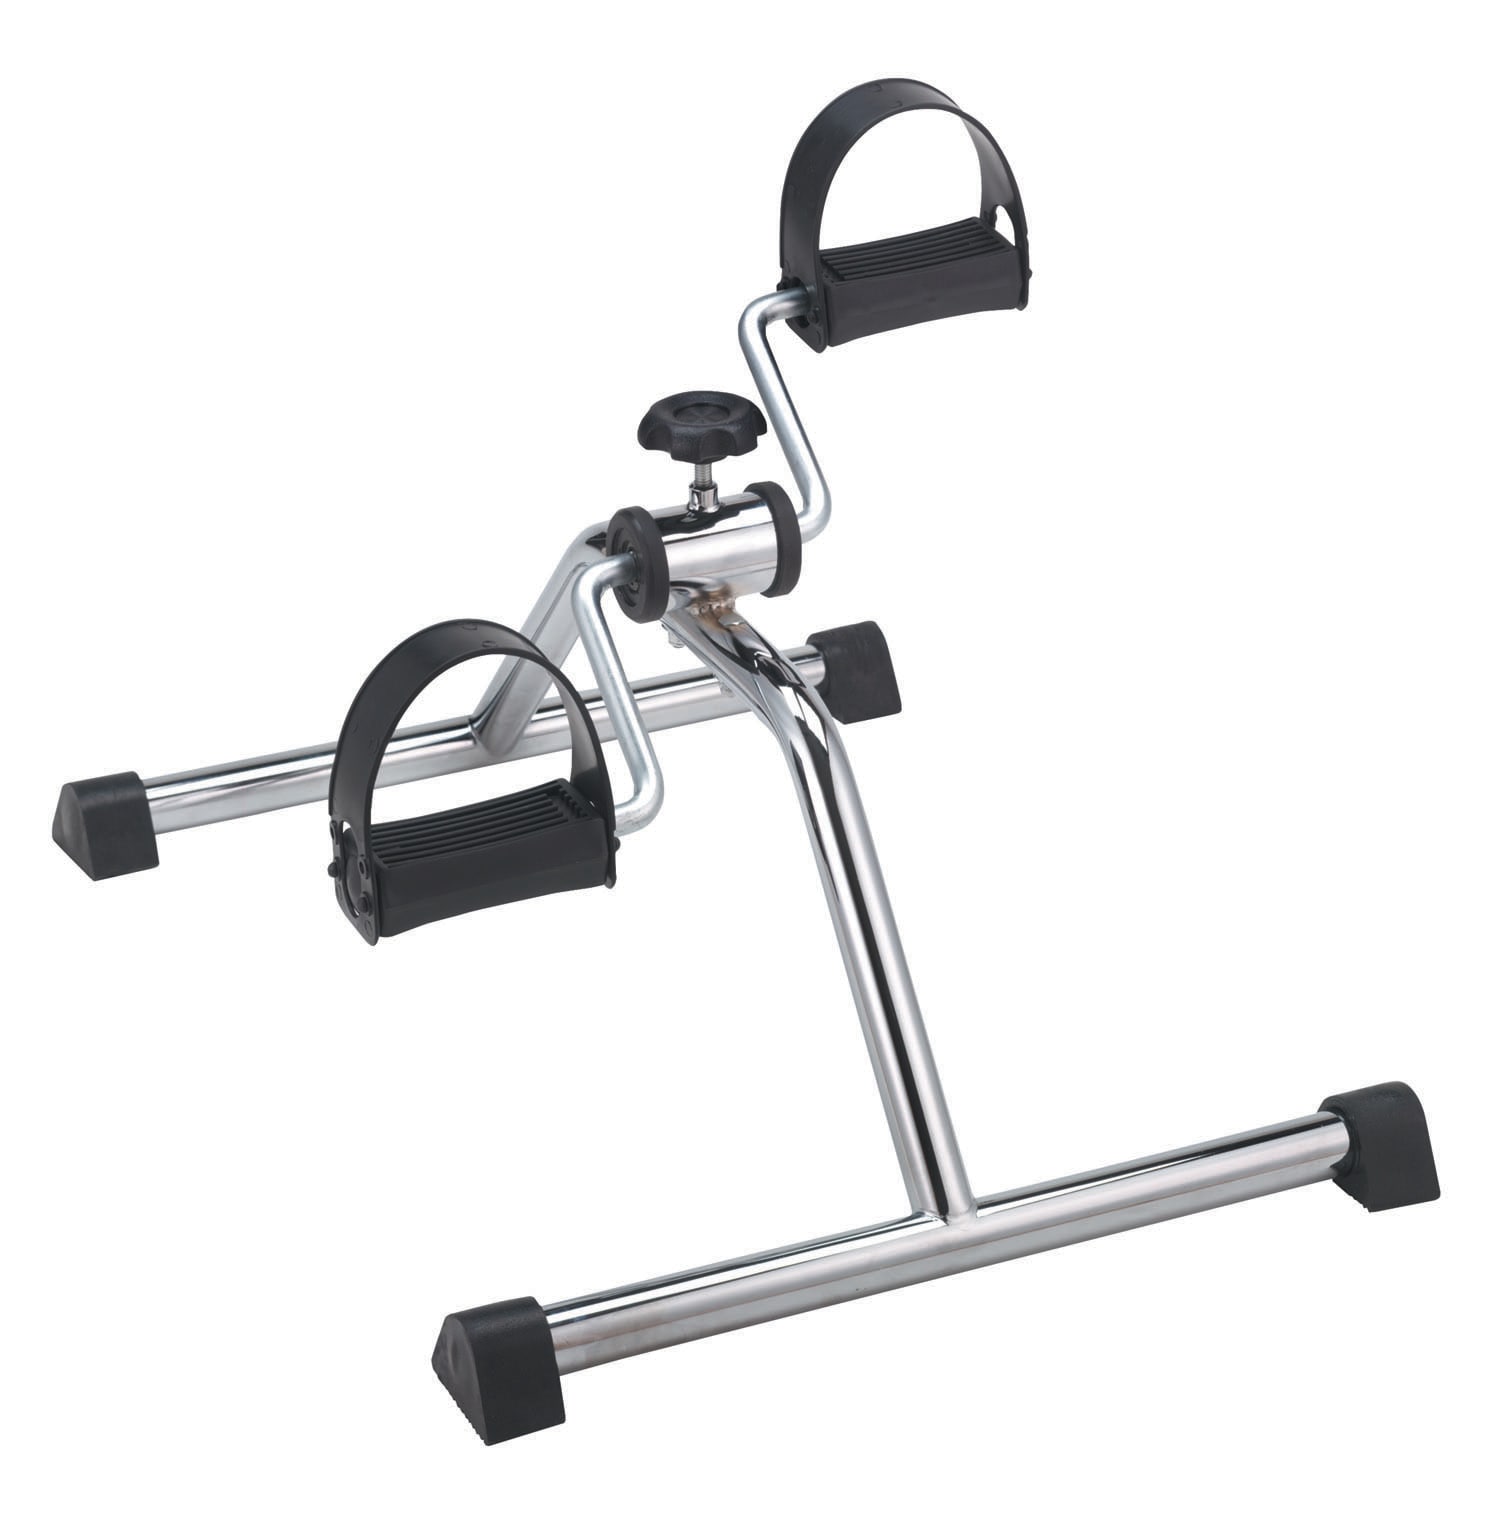 EXERCISER PEDAL SET-UP- Collapsible Body Weight Upright Cycle Exercise Bike | - HealthSmart 660-2008-0000